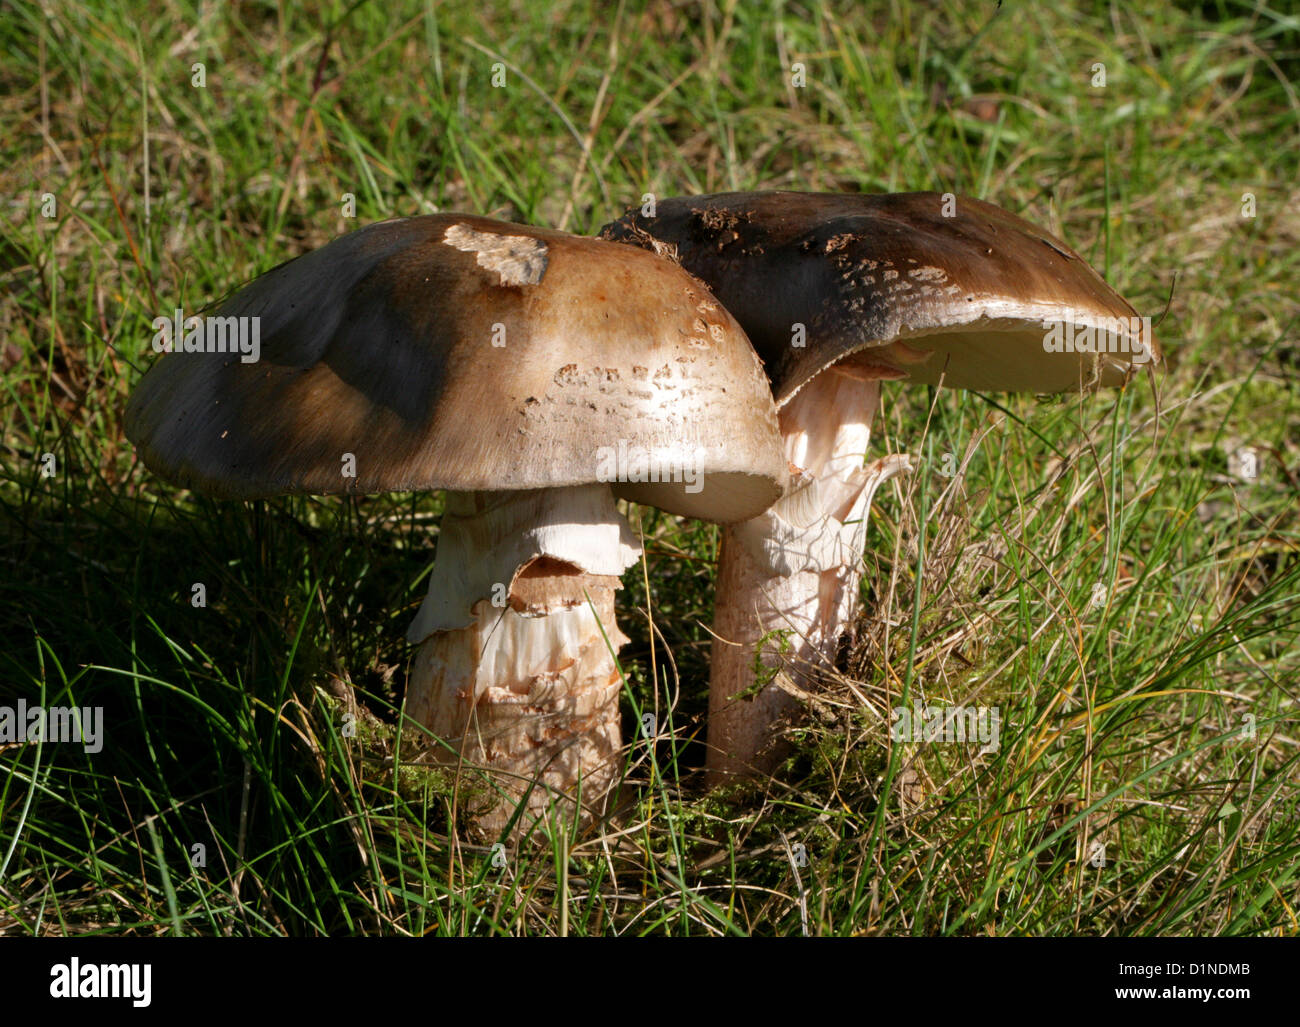 A Pair of Large Agaric Mushrooms Growing in Grassy Woodland. Possibly Scaly Wood Mushrooms, Agaricus langei, Agaricaceae. Stock Photo